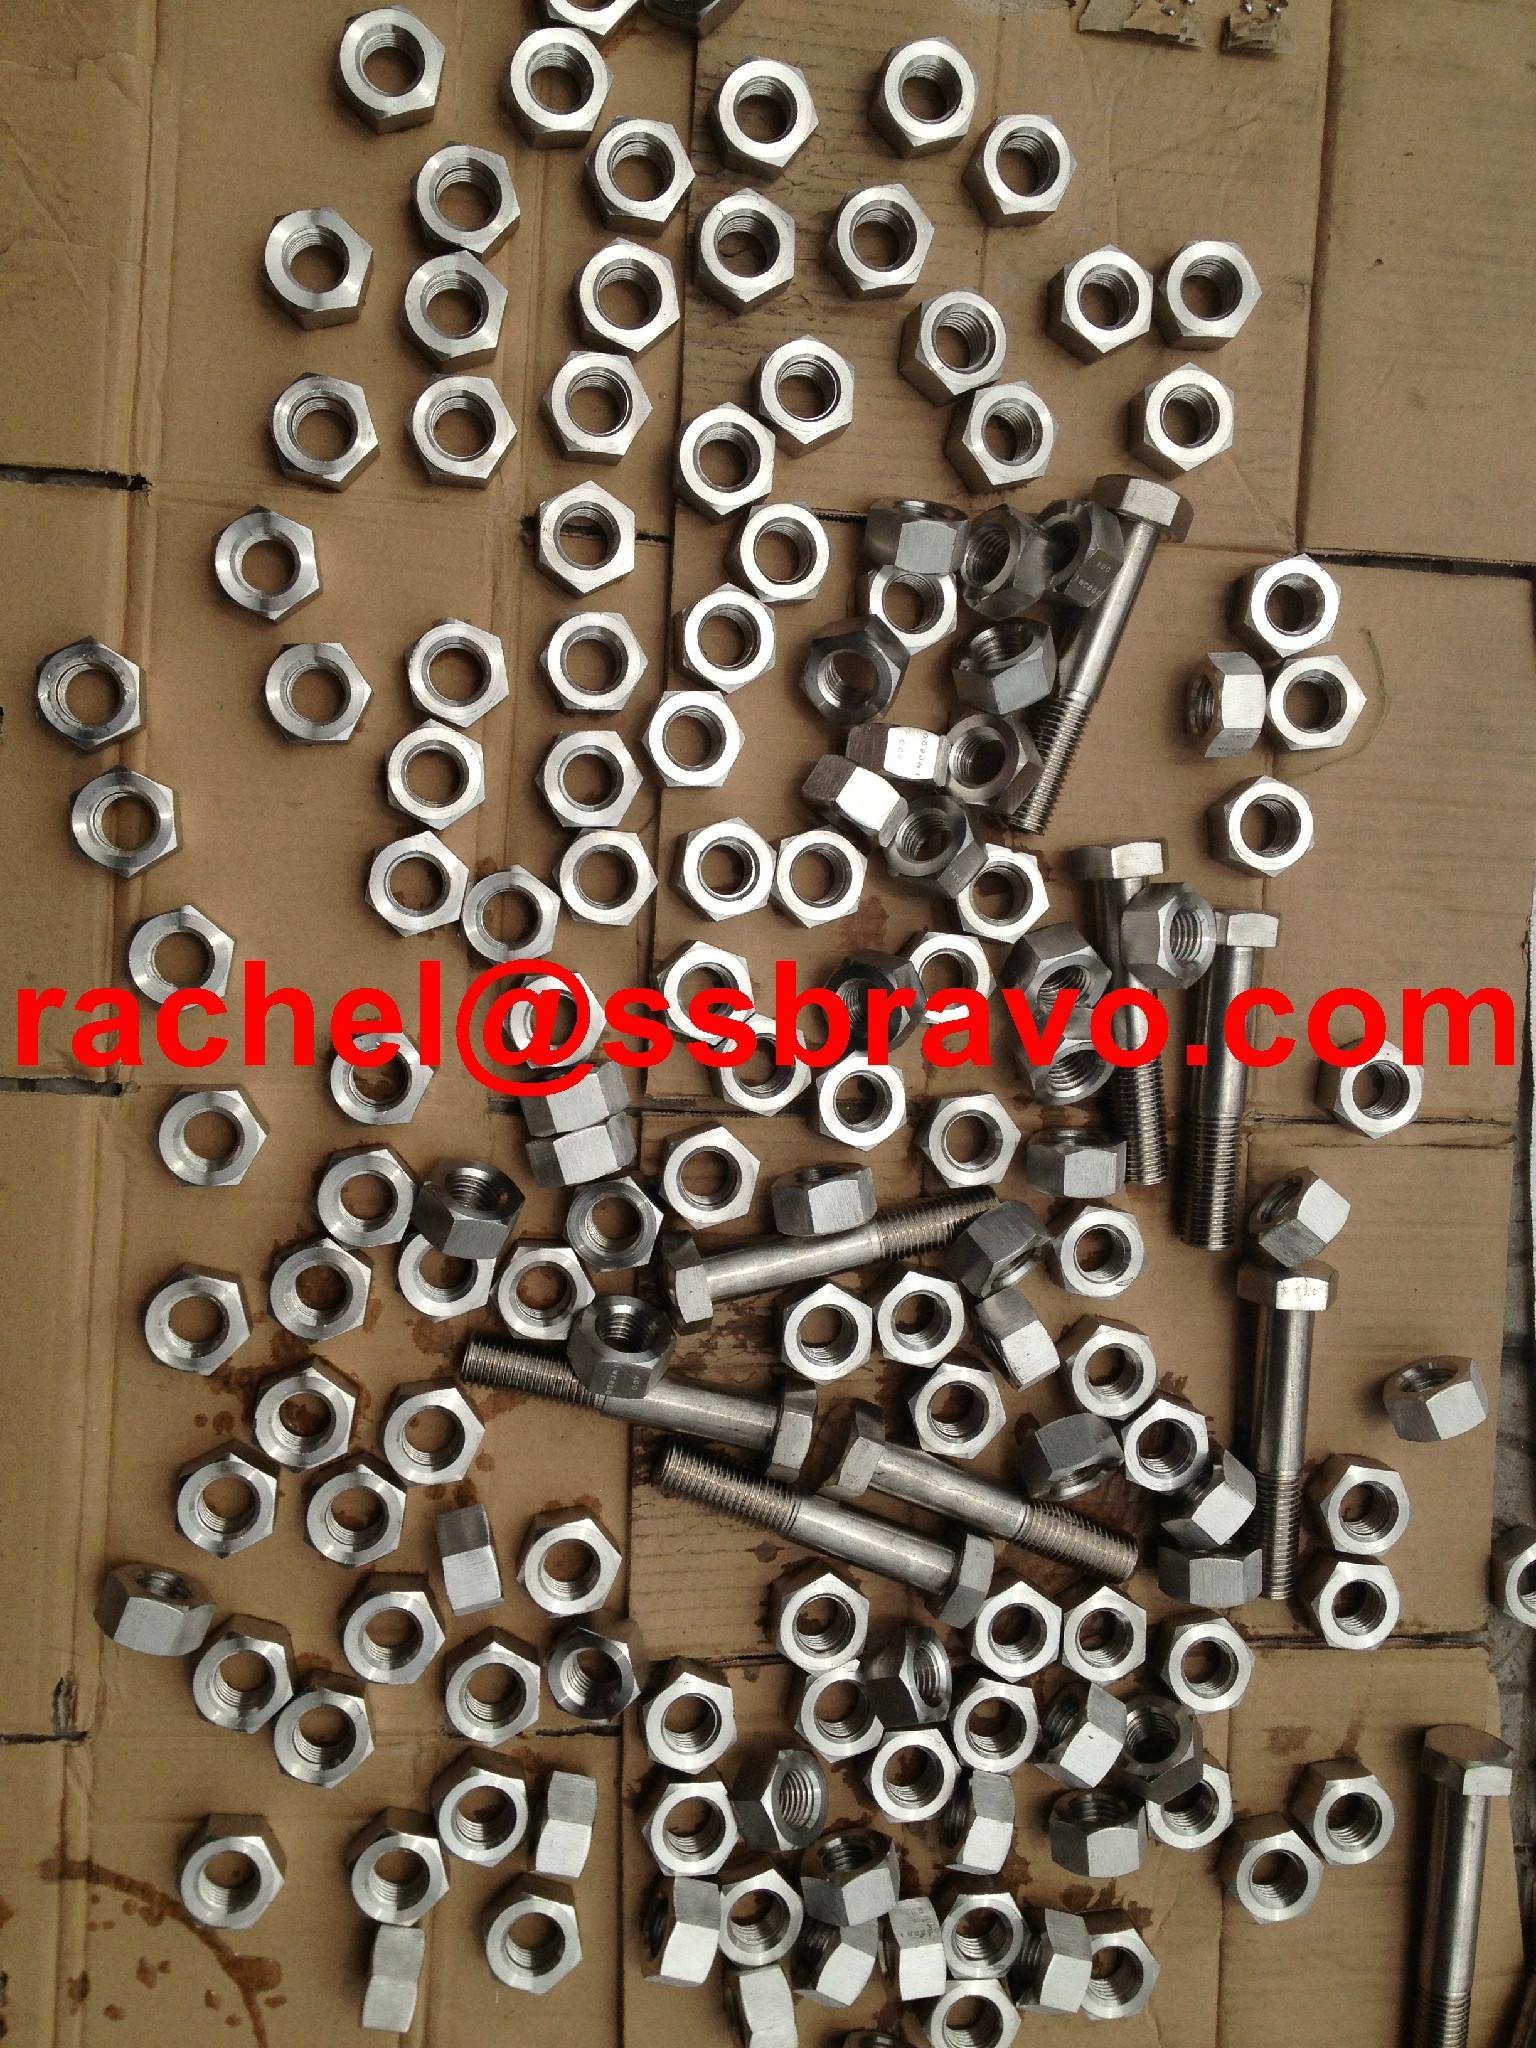 Alloy59 DIN933 Full Thread Hex Head bolts nuts washers